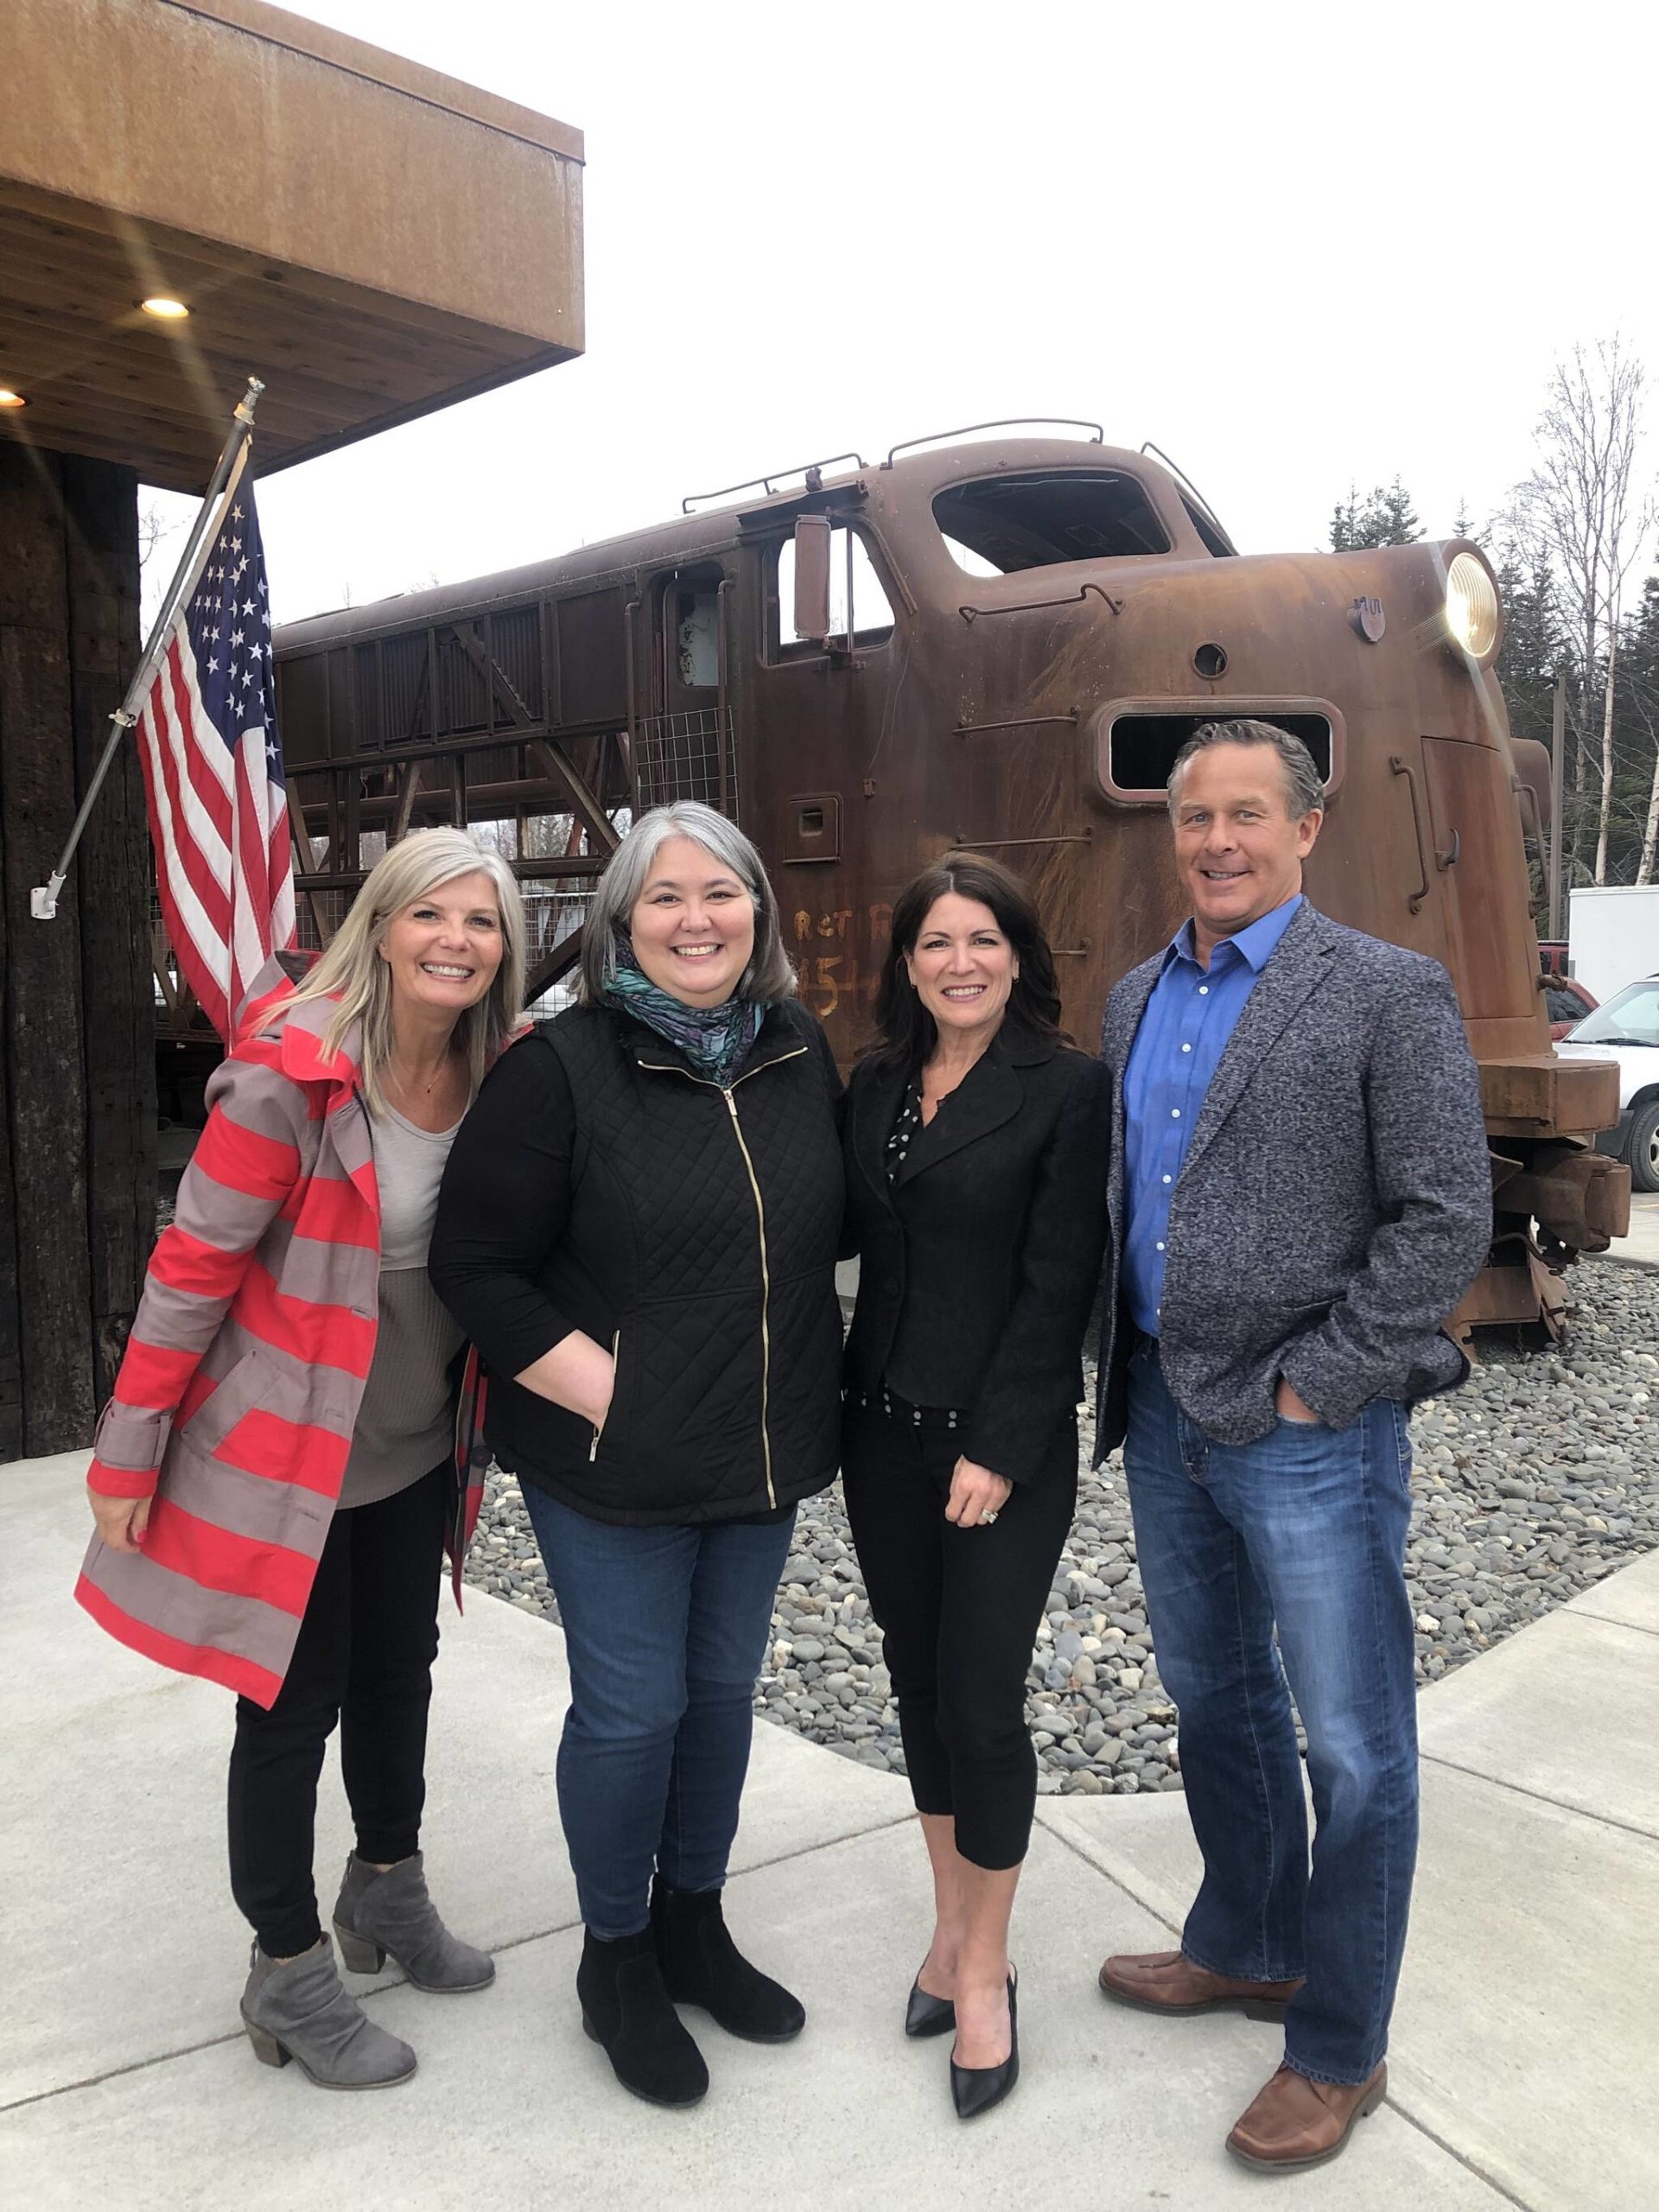 (From left) Regina Daniels Davis, Tara Sweeney, Sara Erickson and Greg Erickson attend a campaign meet and greet at Addie Camp on Saturday, April 16, 2022 in Soldotna, Alaska. Sweeney is running to fill the seat of former U.S. House Rep. Don Young, who died in March. (Photo courtesy Karina Waller)